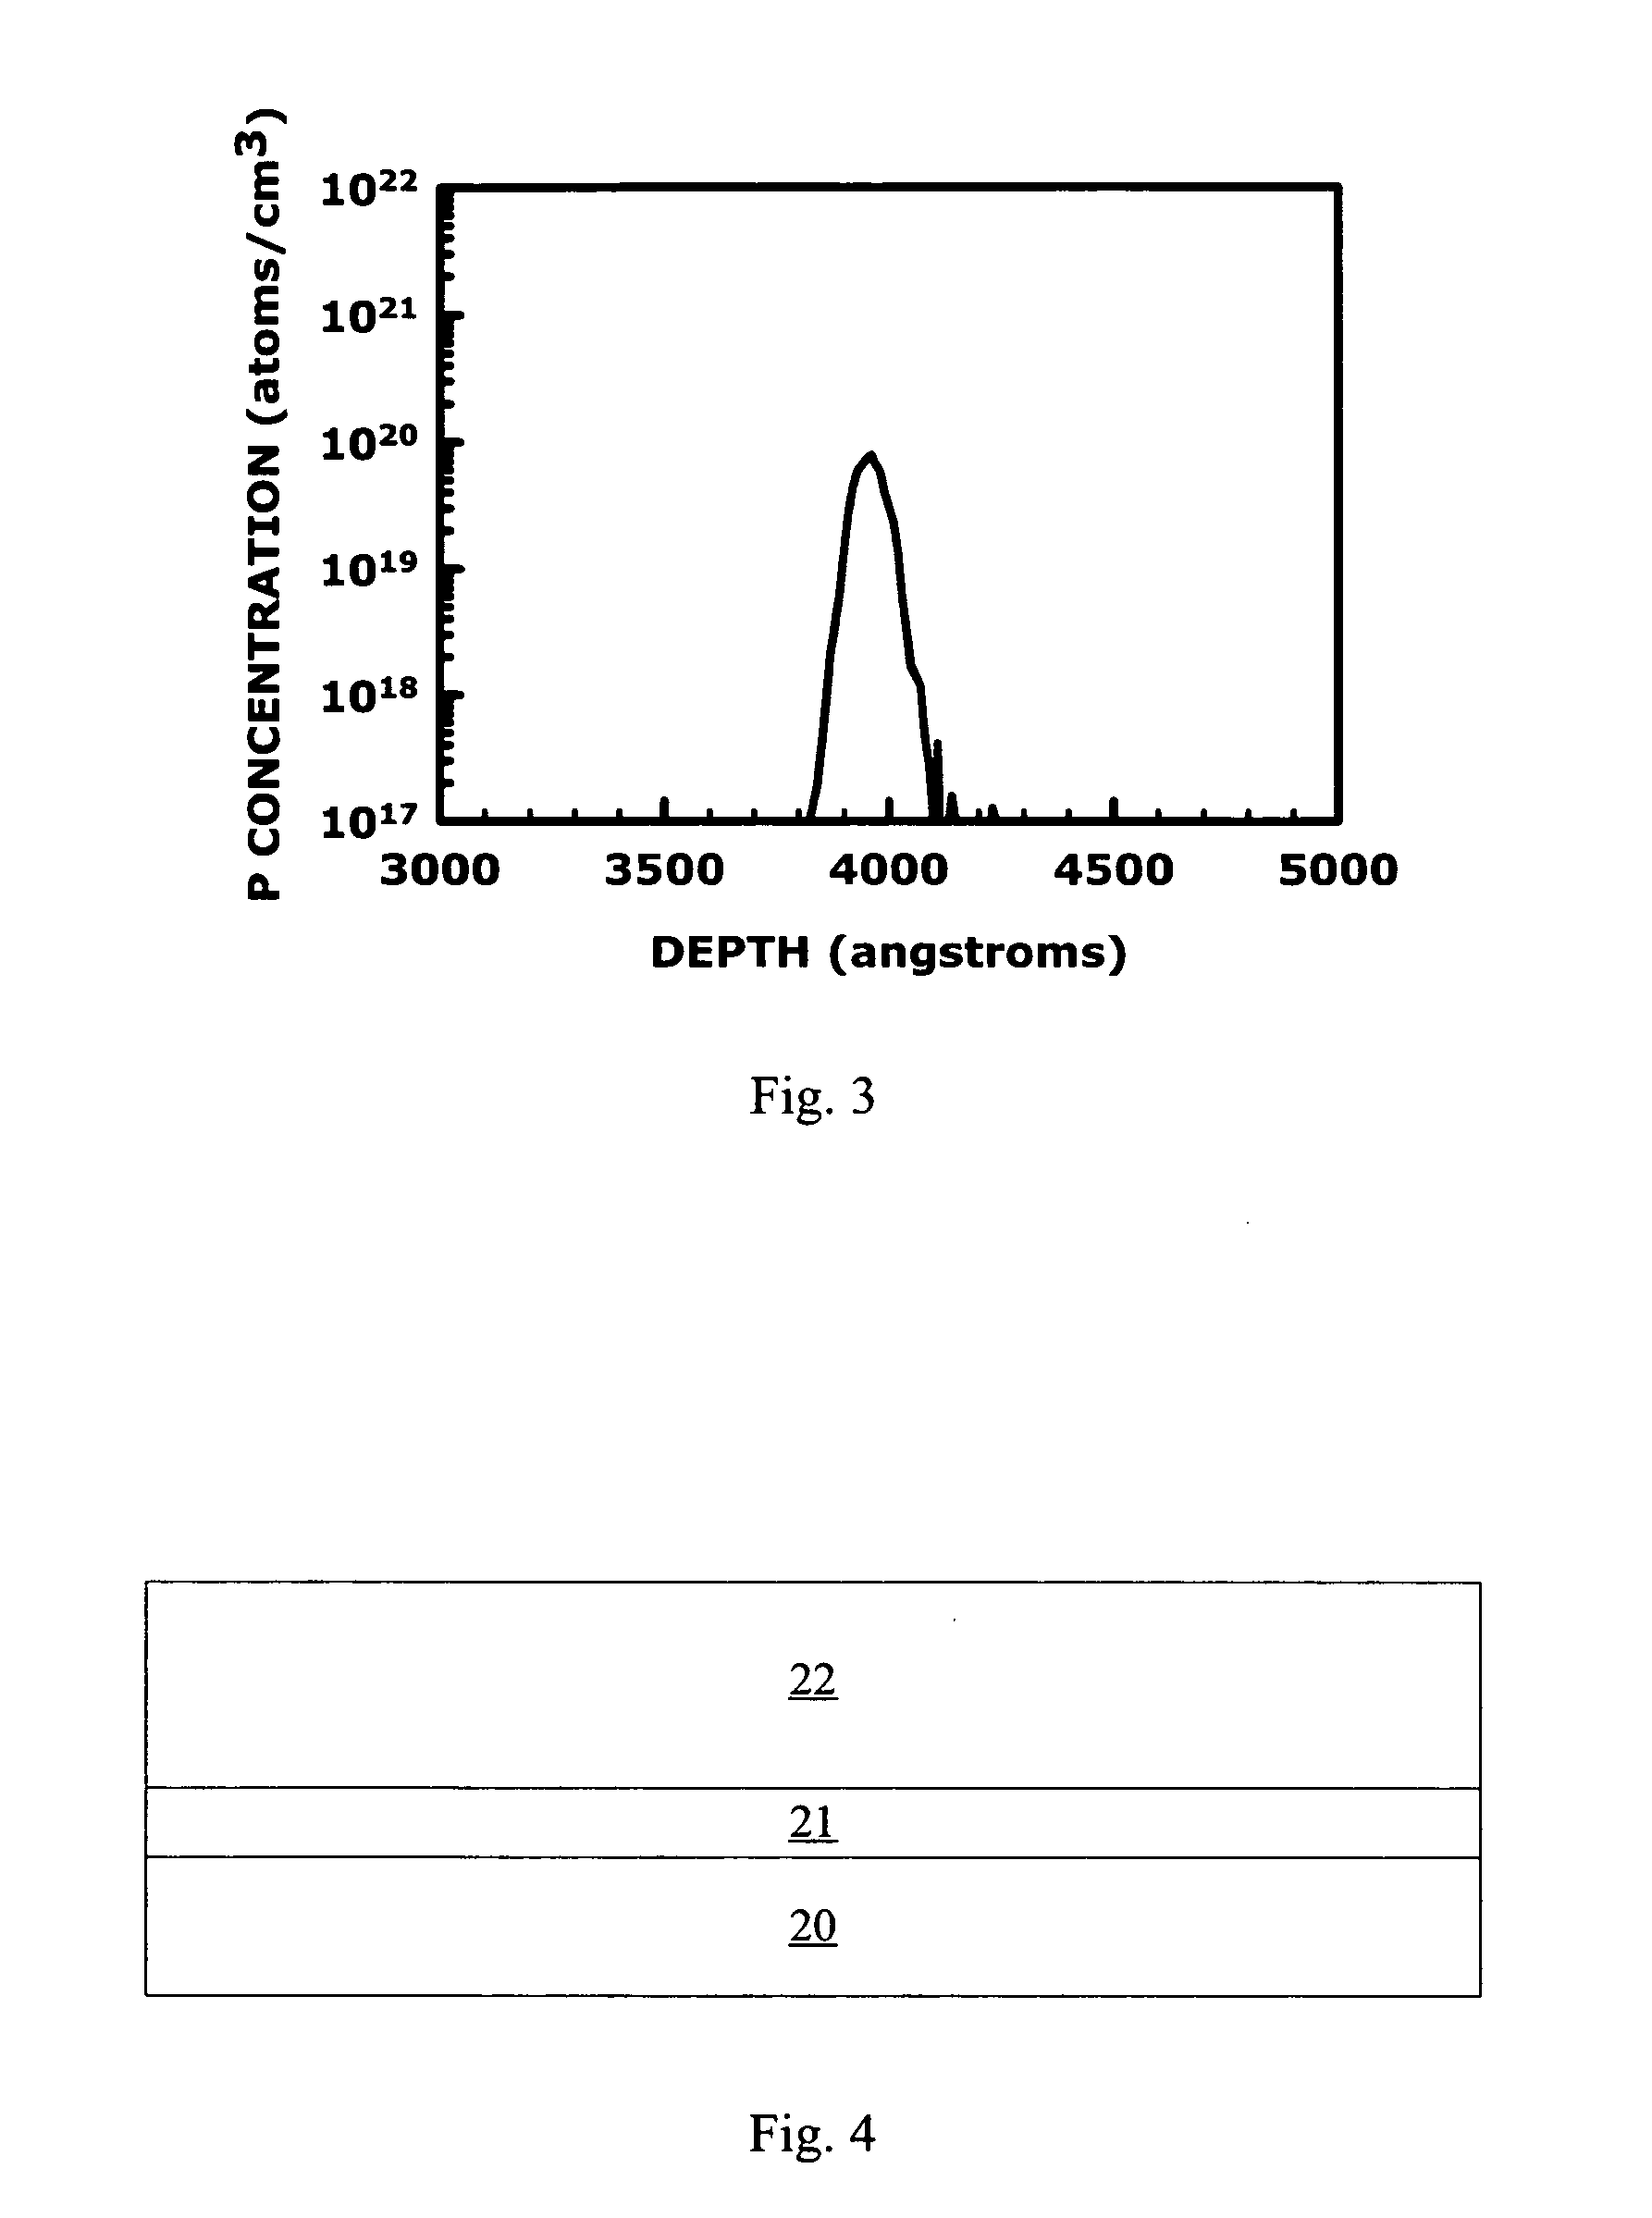 Deposited semiconductor structure to minimize N-type dopant diffusion and method of making